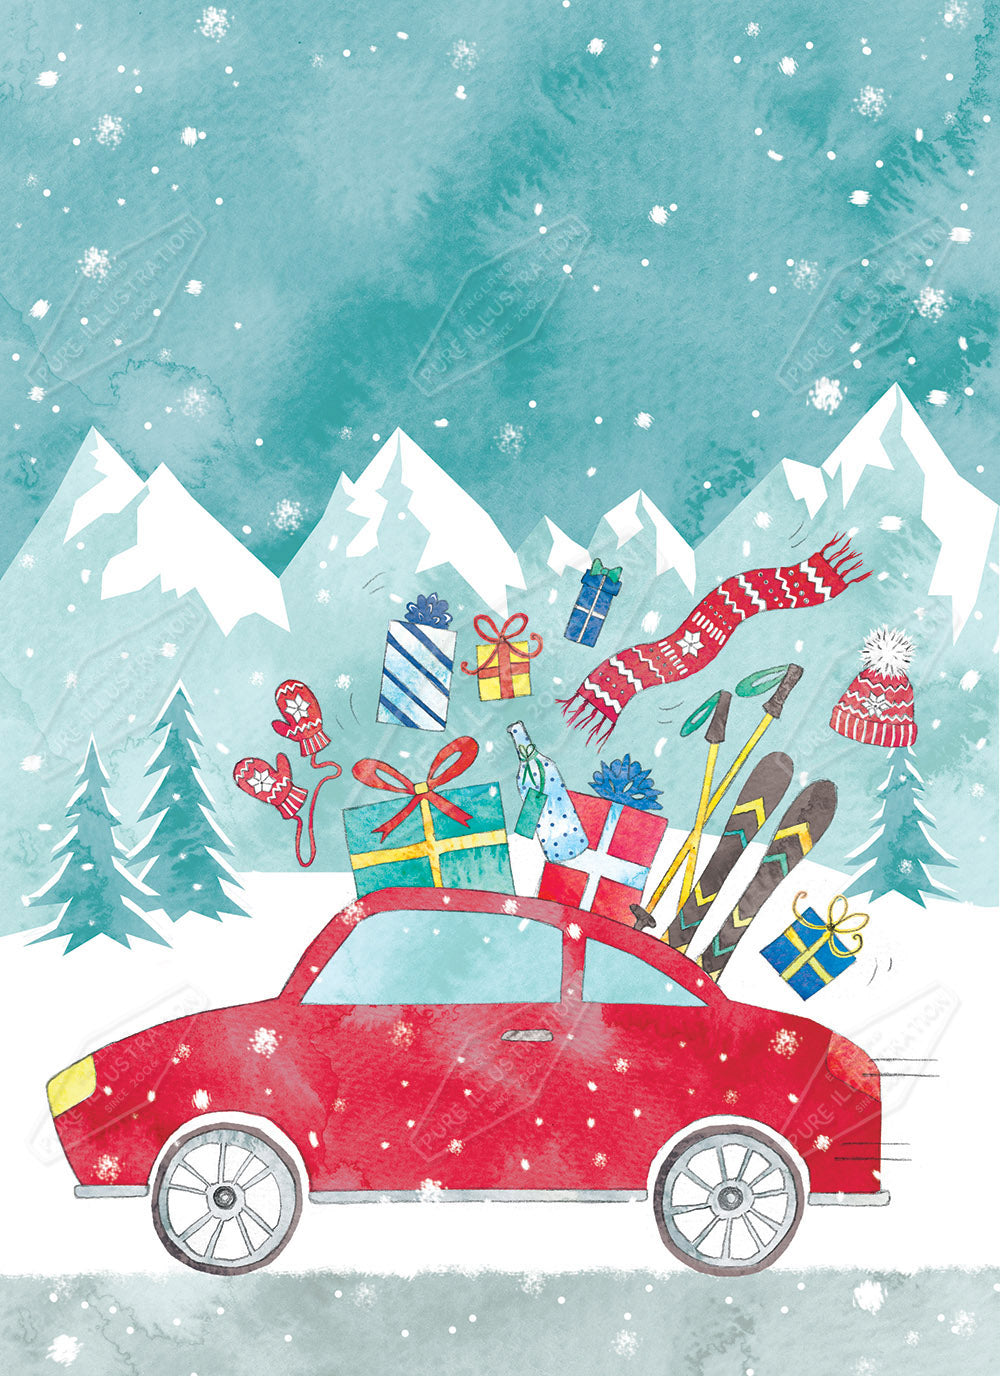 Driving Home for Christmas Design by Victoria Marks for Pure Art Licensing Agency & Surface Design Studio